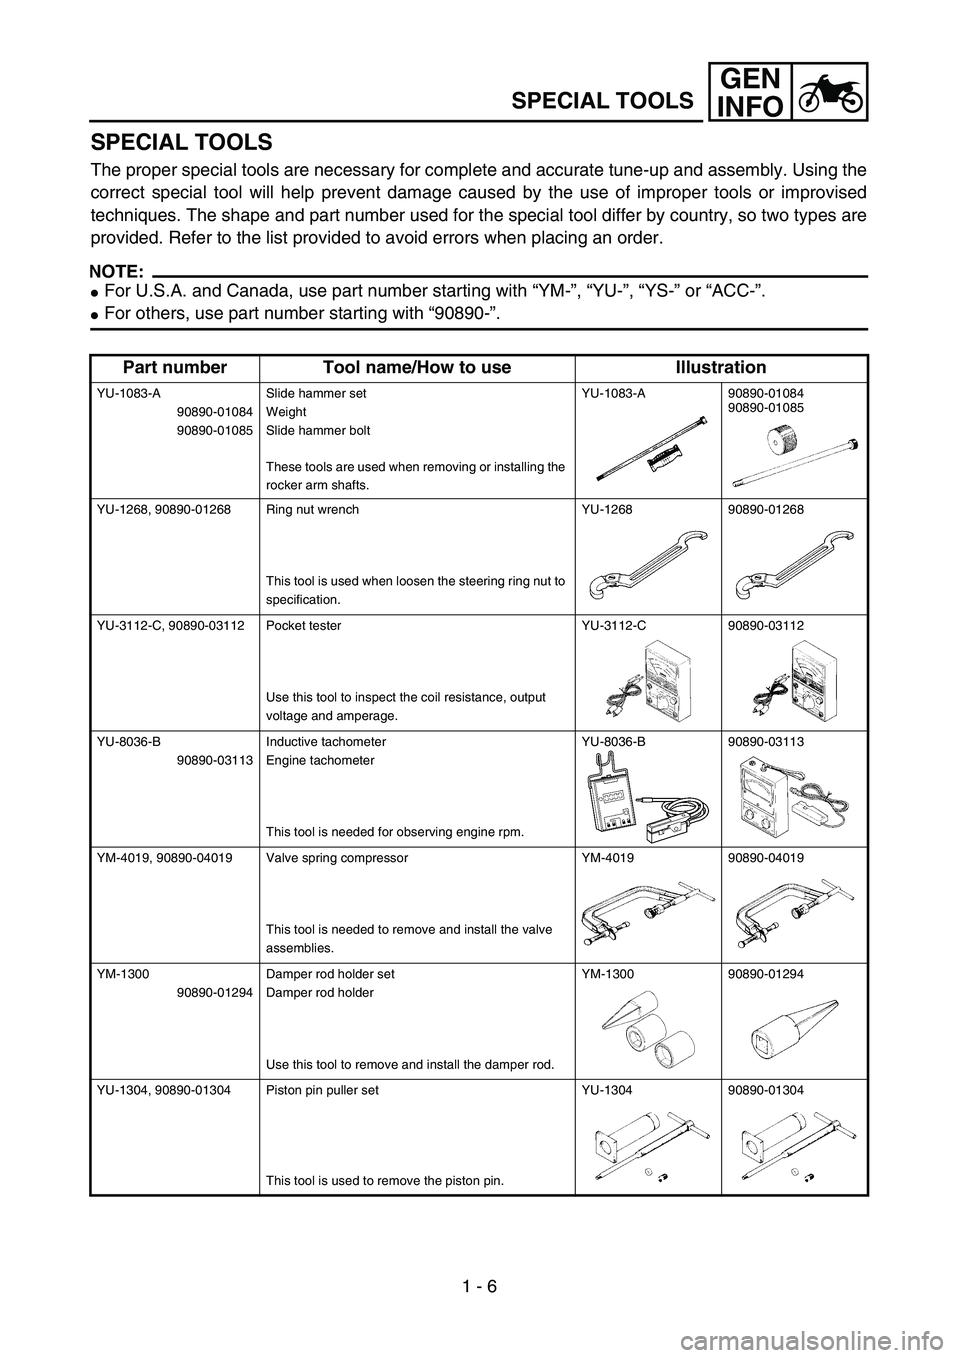 YAMAHA TTR90 2004 Owners Guide 1 - 6
GEN
INFO
SPECIAL TOOLS
SPECIAL TOOLS
The proper special tools are necessary for complete and accurate tune-up and assembly. Using the
correct special tool will help prevent damage caused by the 